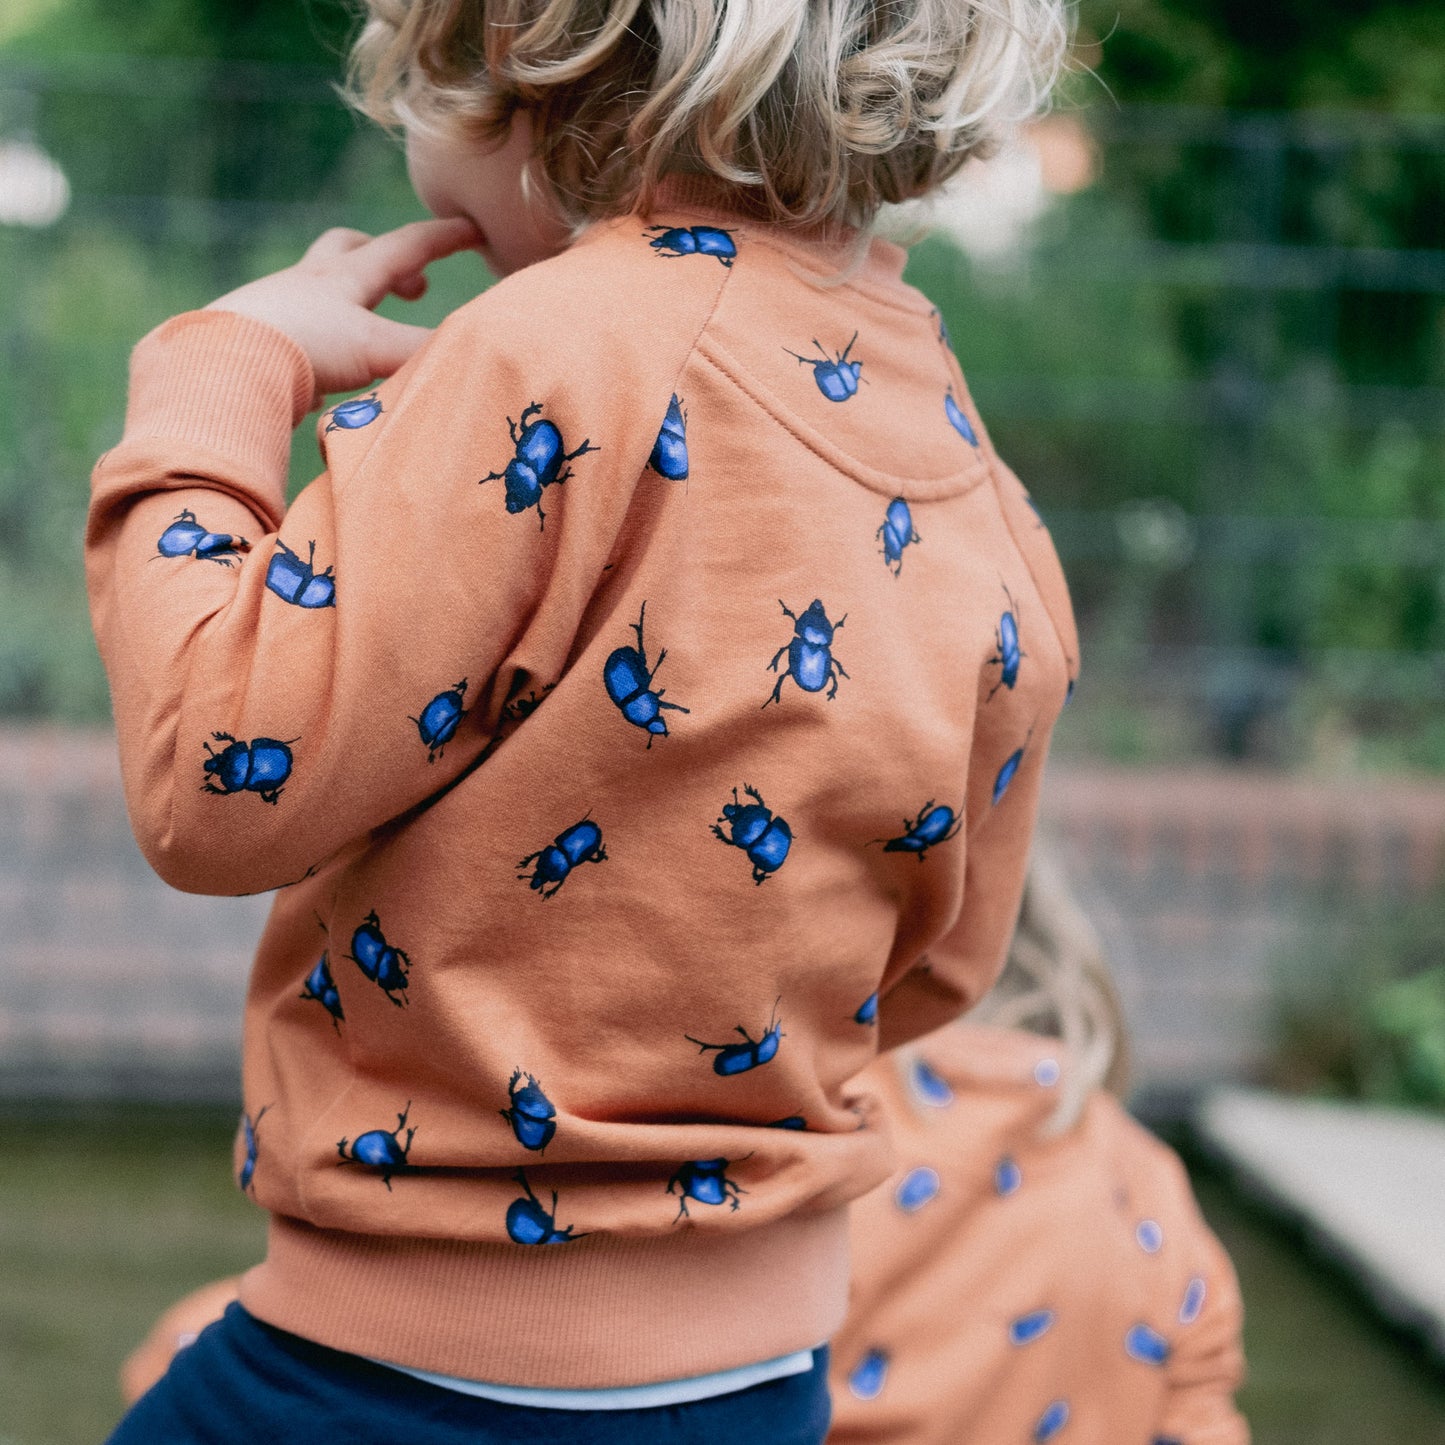 Boy wearing the bomber jacket. with the beetles collection fabric